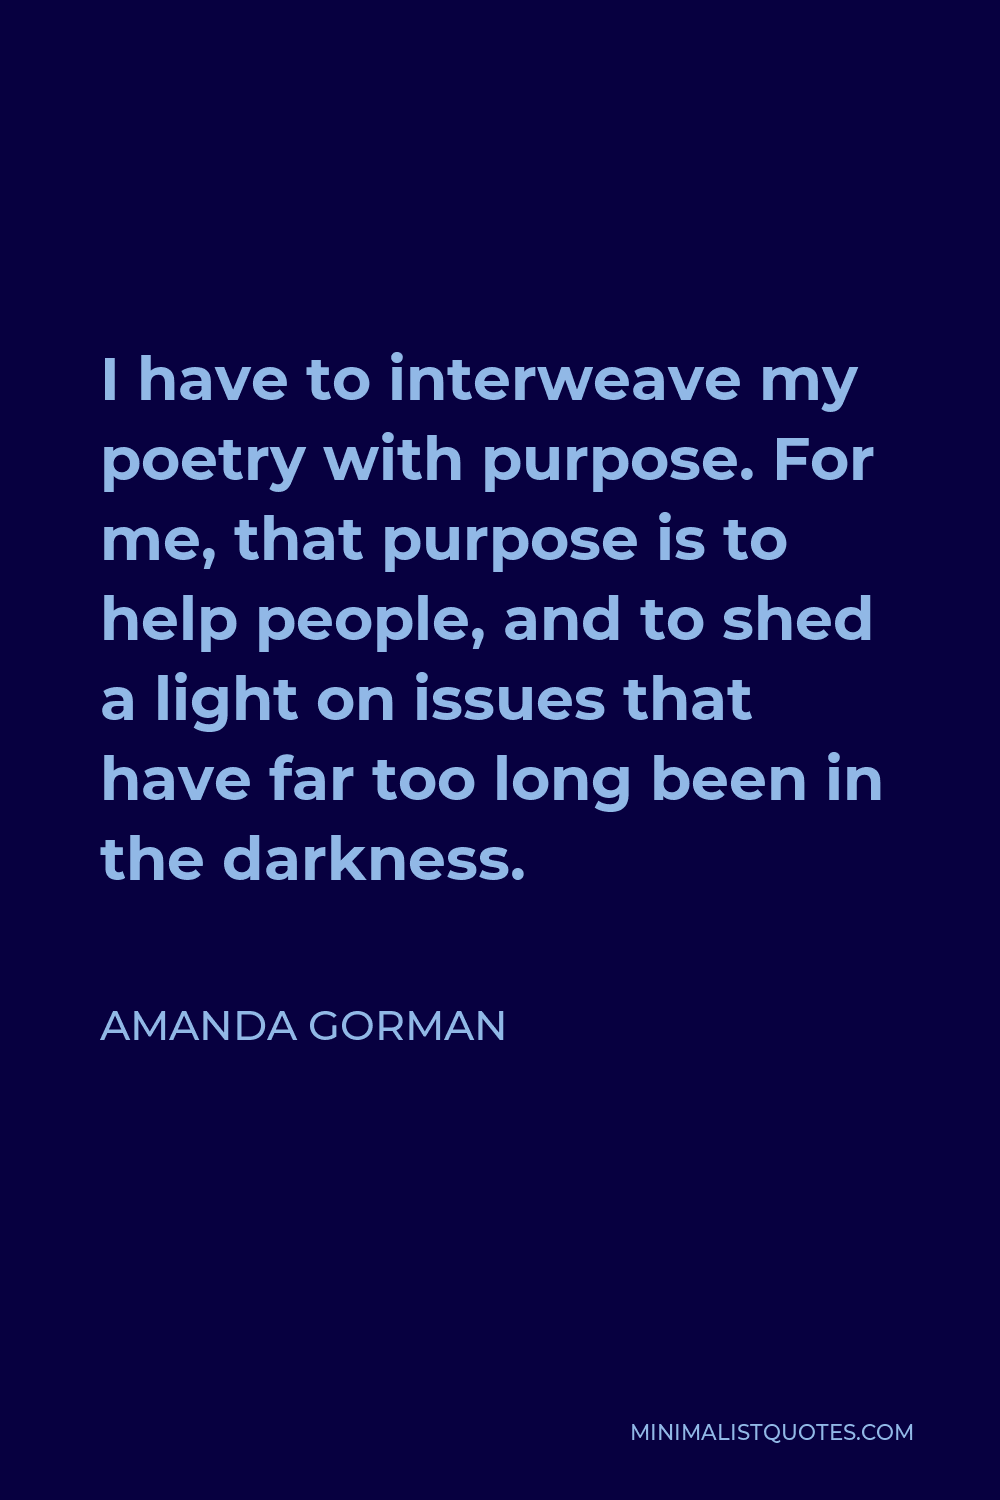 Amanda Gorman Quote - I have to interweave my poetry with purpose. For me, that purpose is to help people, and to shed a light on issues that have far too long been in the darkness.